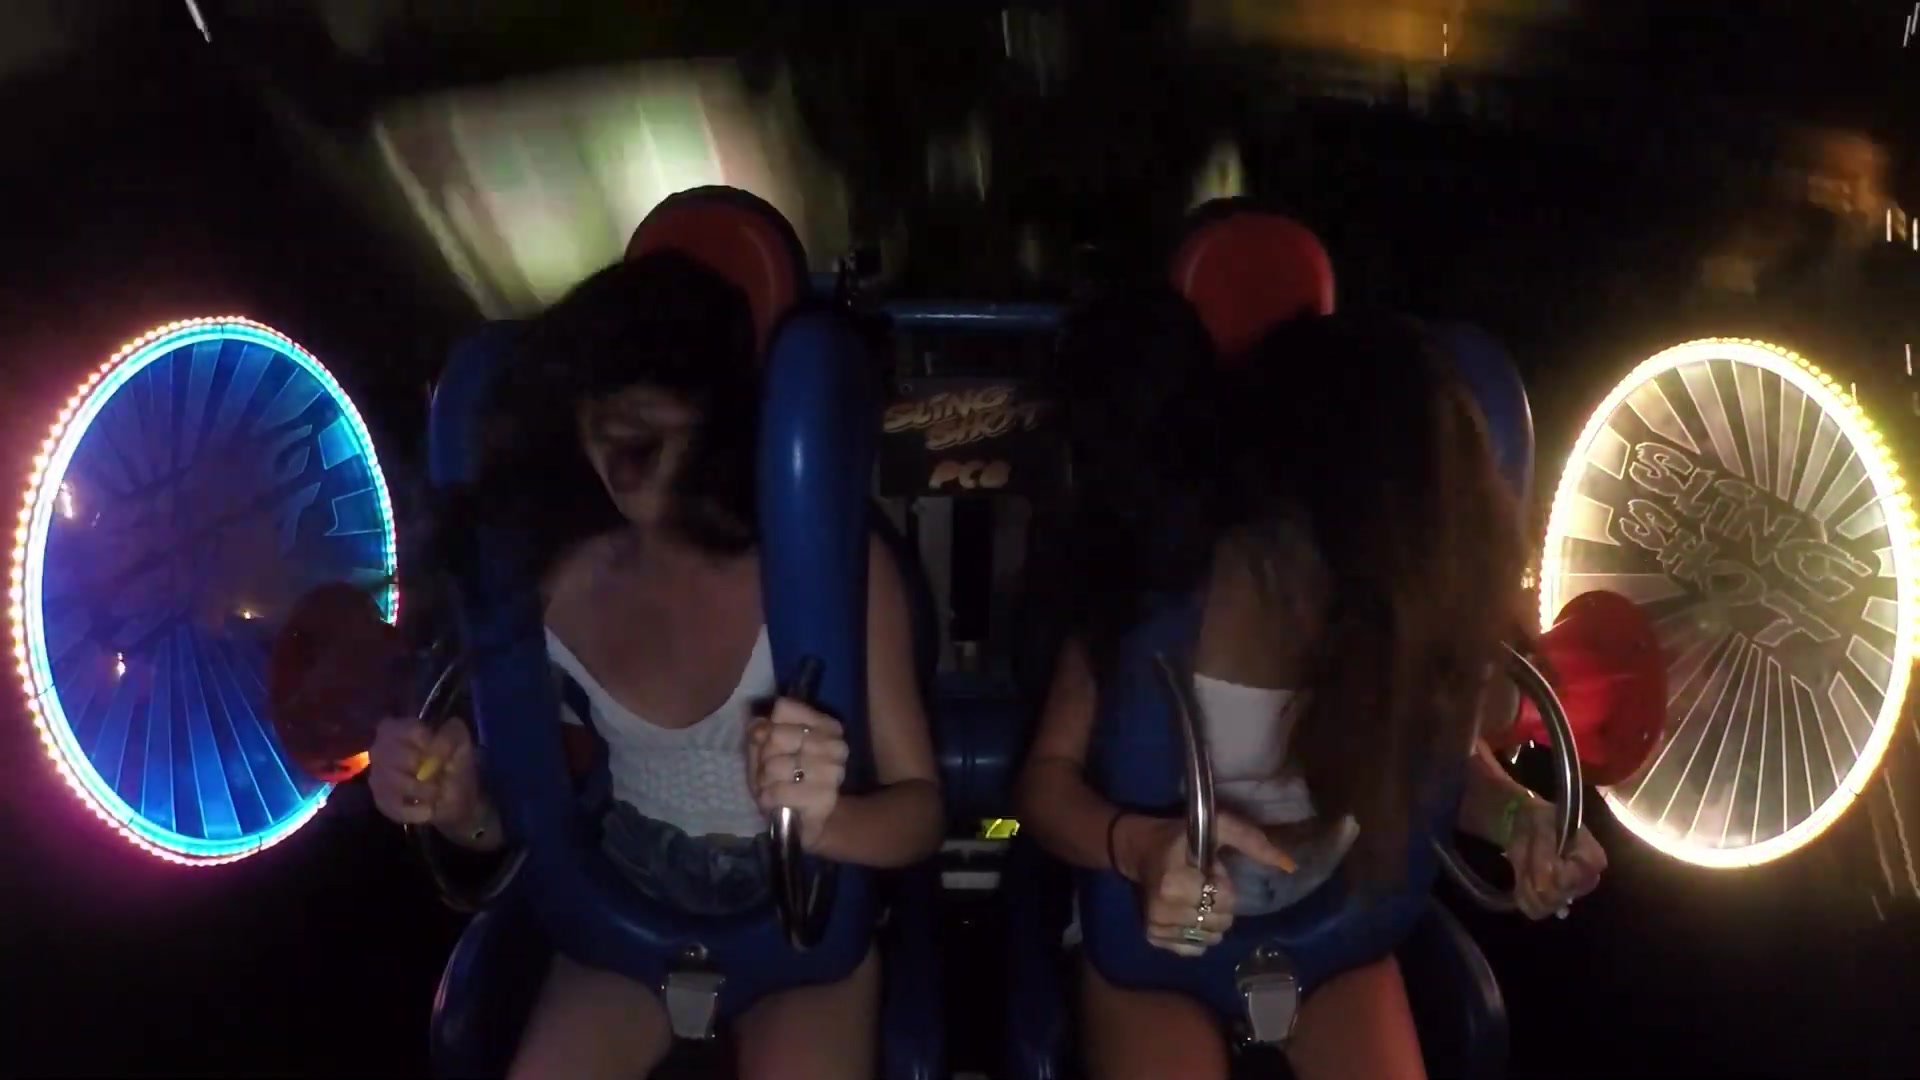 Titties out on slingshot